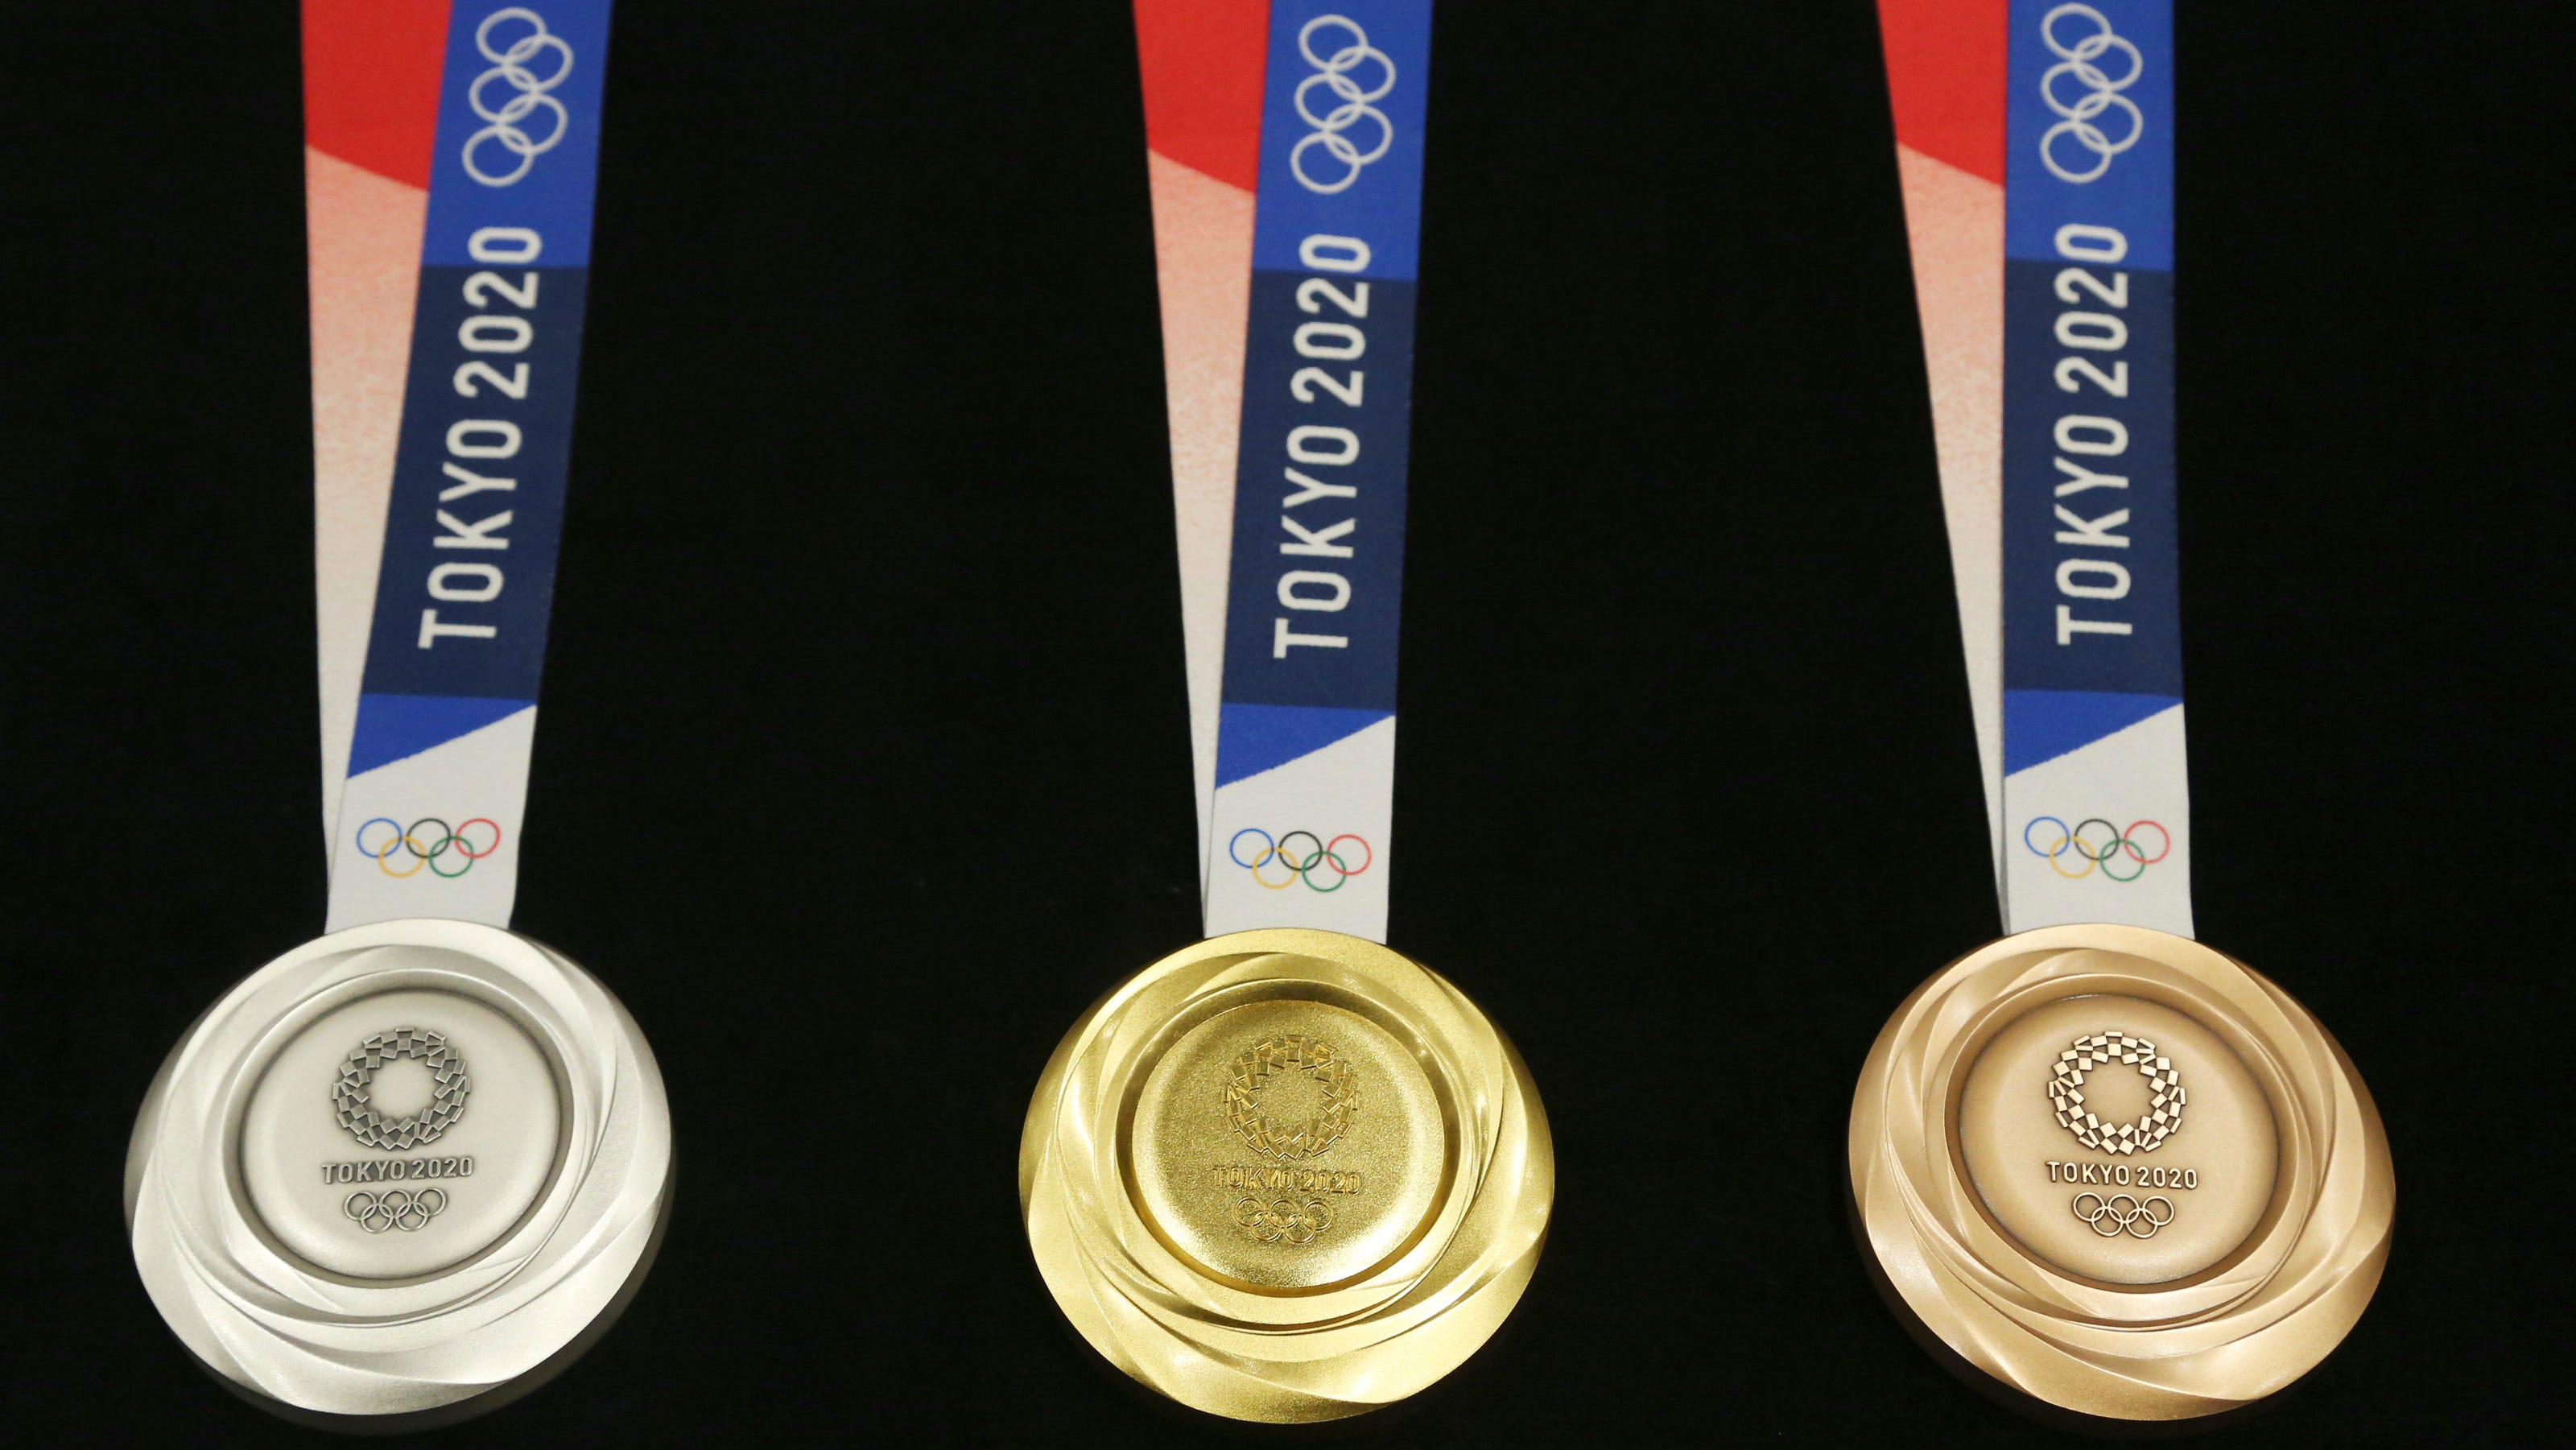 What do Olympics gold, silver and bronze medals look like in 2021?